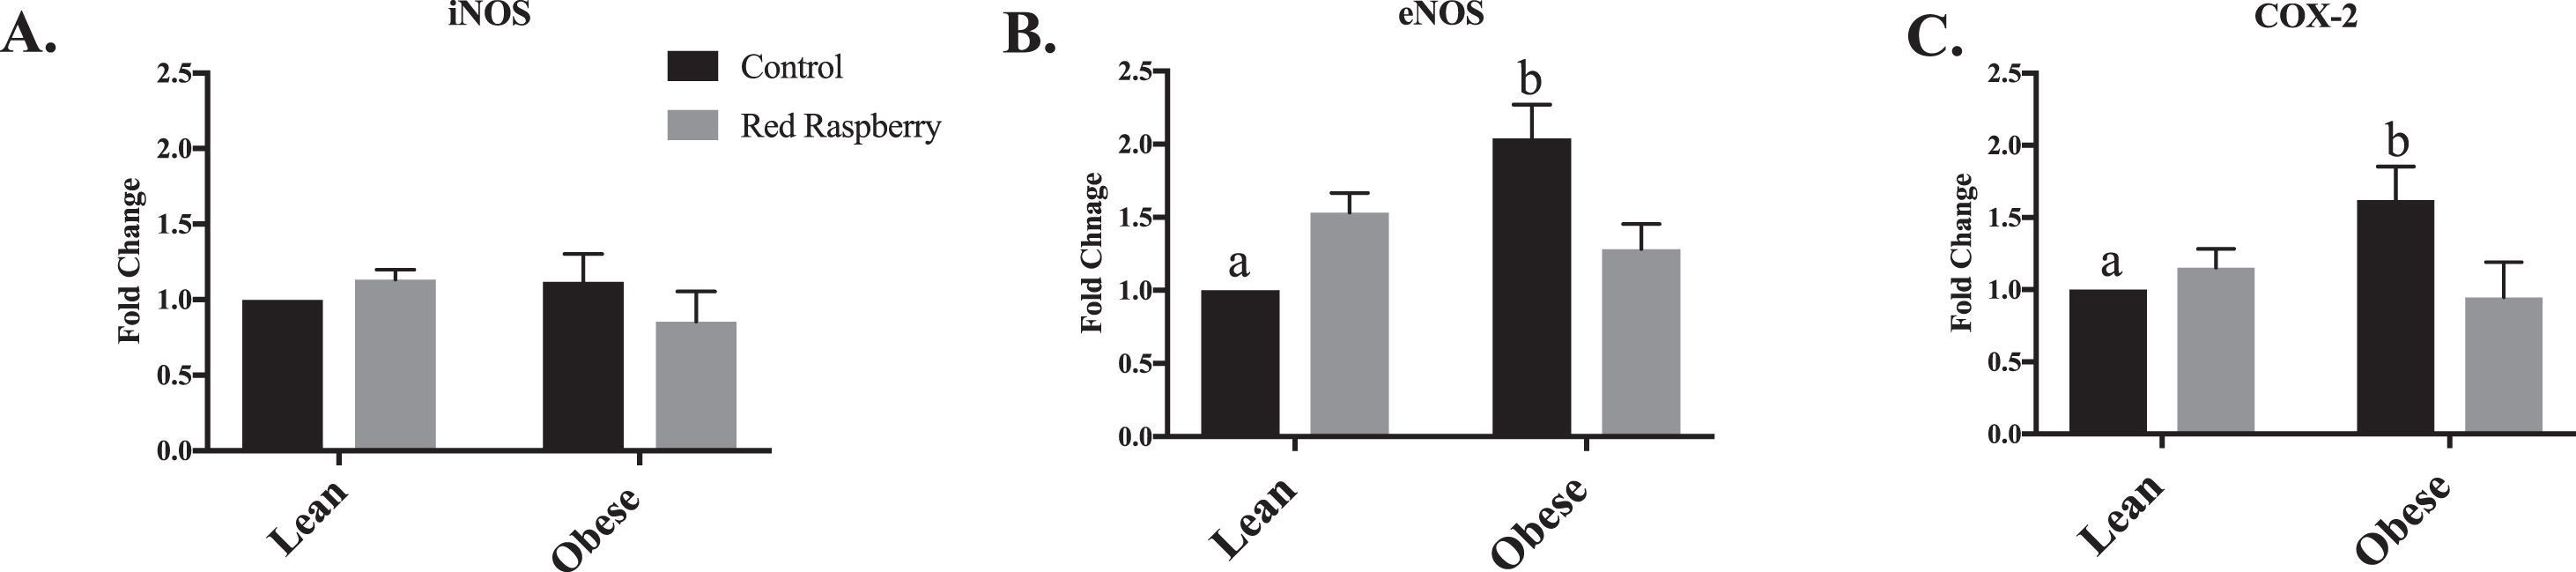 (A-C): Relative gene expression of the aorta of lean (LZR) and obese (OZR) Zucker rats assigned a control (C) or whole red raspberry (WRR) diet: A. inducible nitric oxide (iNOS), B. endothelial nitric oxide (eNOS) and C. cyclooxygenase-2 (COX-2). Note: iNOS (inducible nitric oxide synthase); eNOS (endothelm nitric oxide); COX-2 (cyclooxygenase-2). The values are expressed as means±SEM (n = 8 rats per treatment group). aSignificant effect of animal type, LZR-C vs OZR-C (p < 0.05). bSignificant effect of diet, OZR-C vs OZR-WRR (p < 0.05)